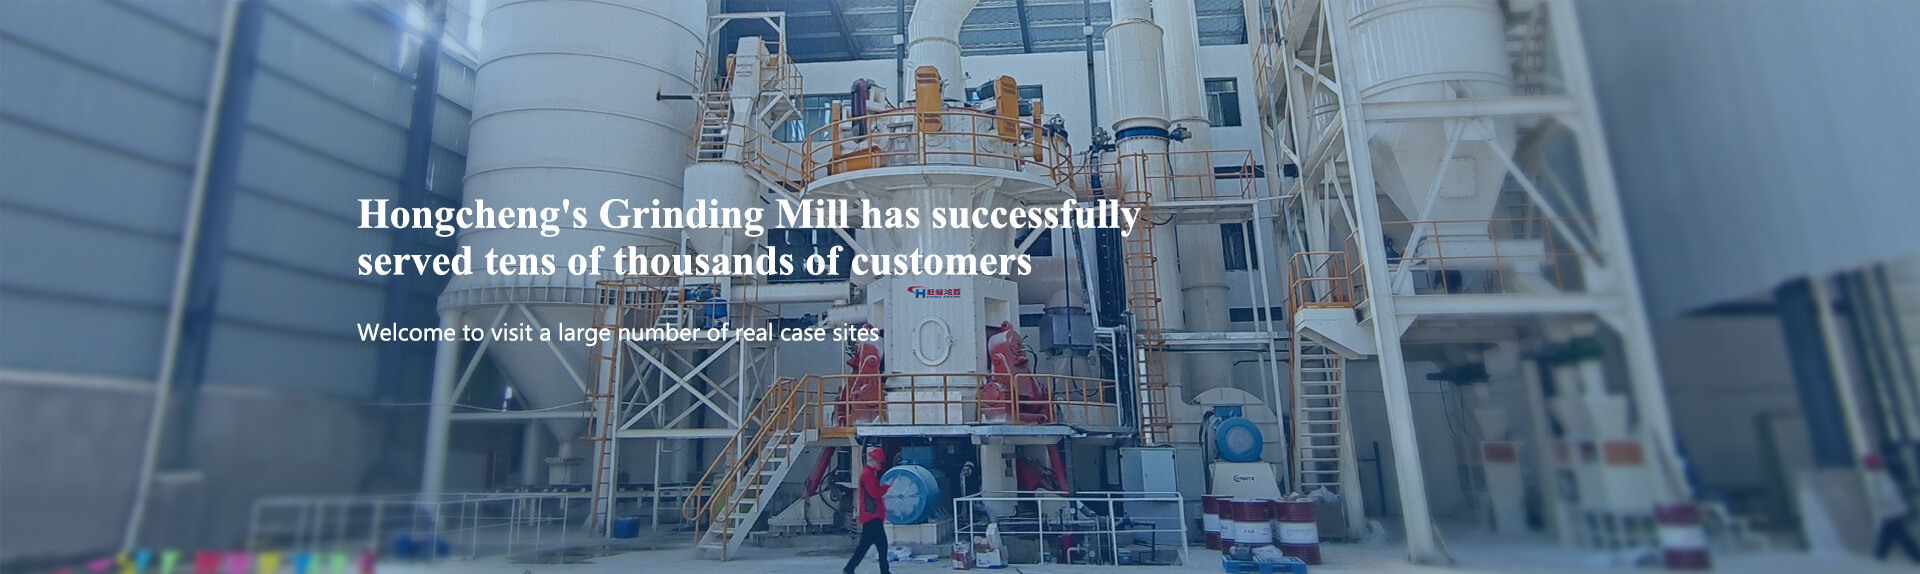 HC1700 Grinding Mill - 150,000t/year manganese powder producing project in Guangxi